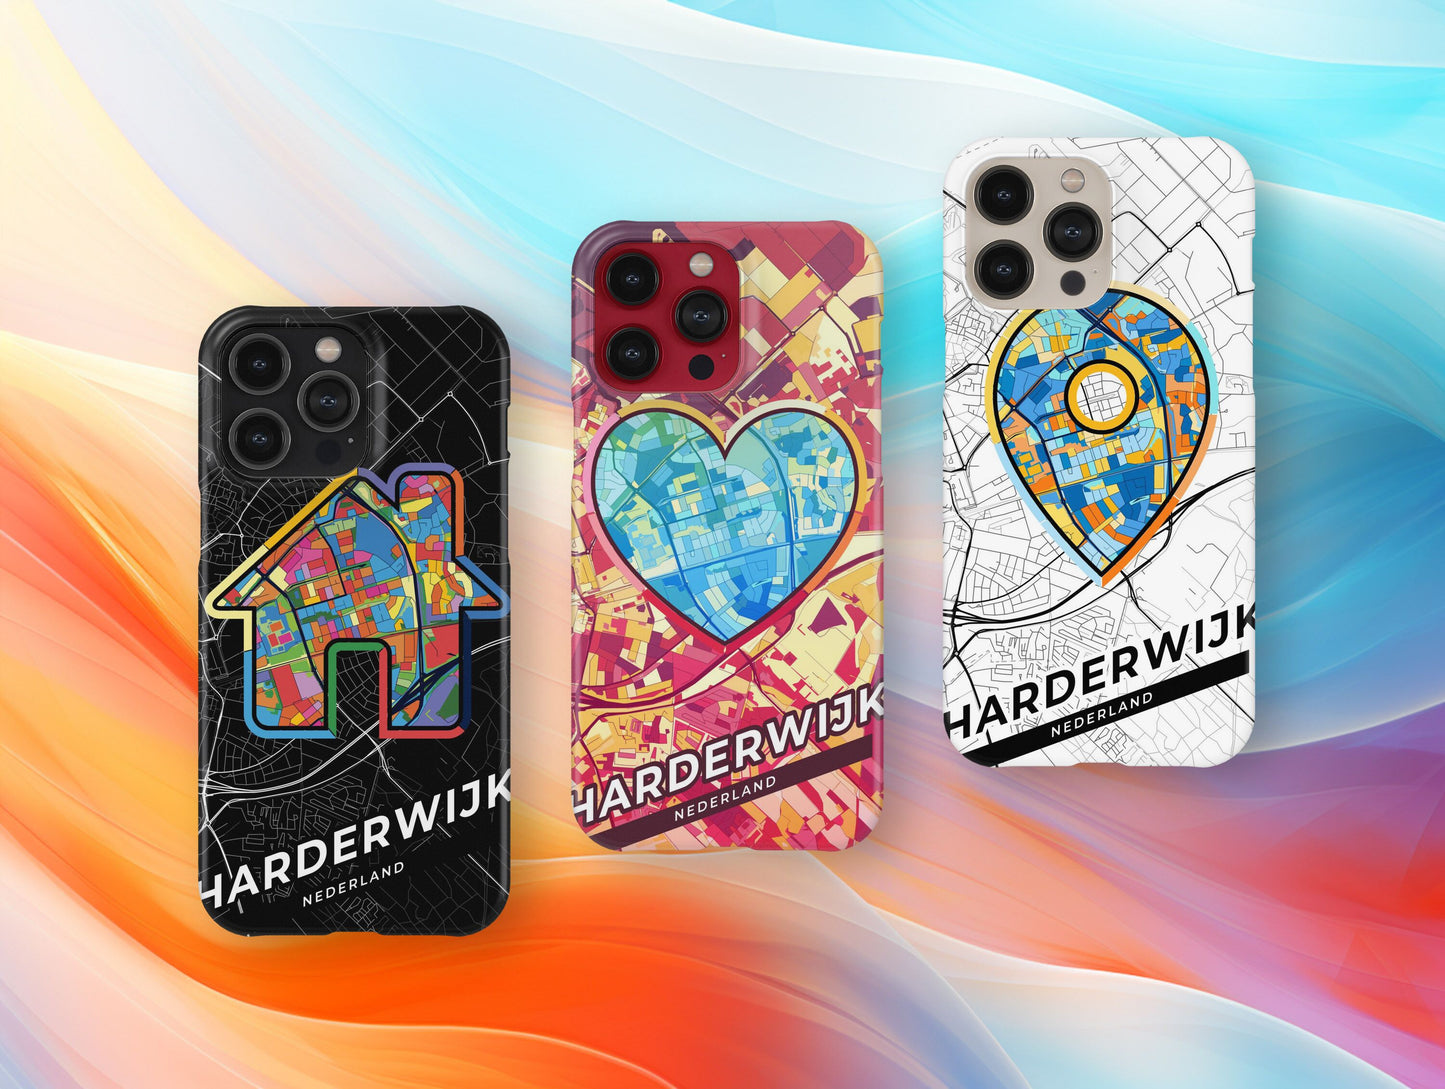 Harderwijk Netherlands slim phone case with colorful icon. Birthday, wedding or housewarming gift. Couple match cases.